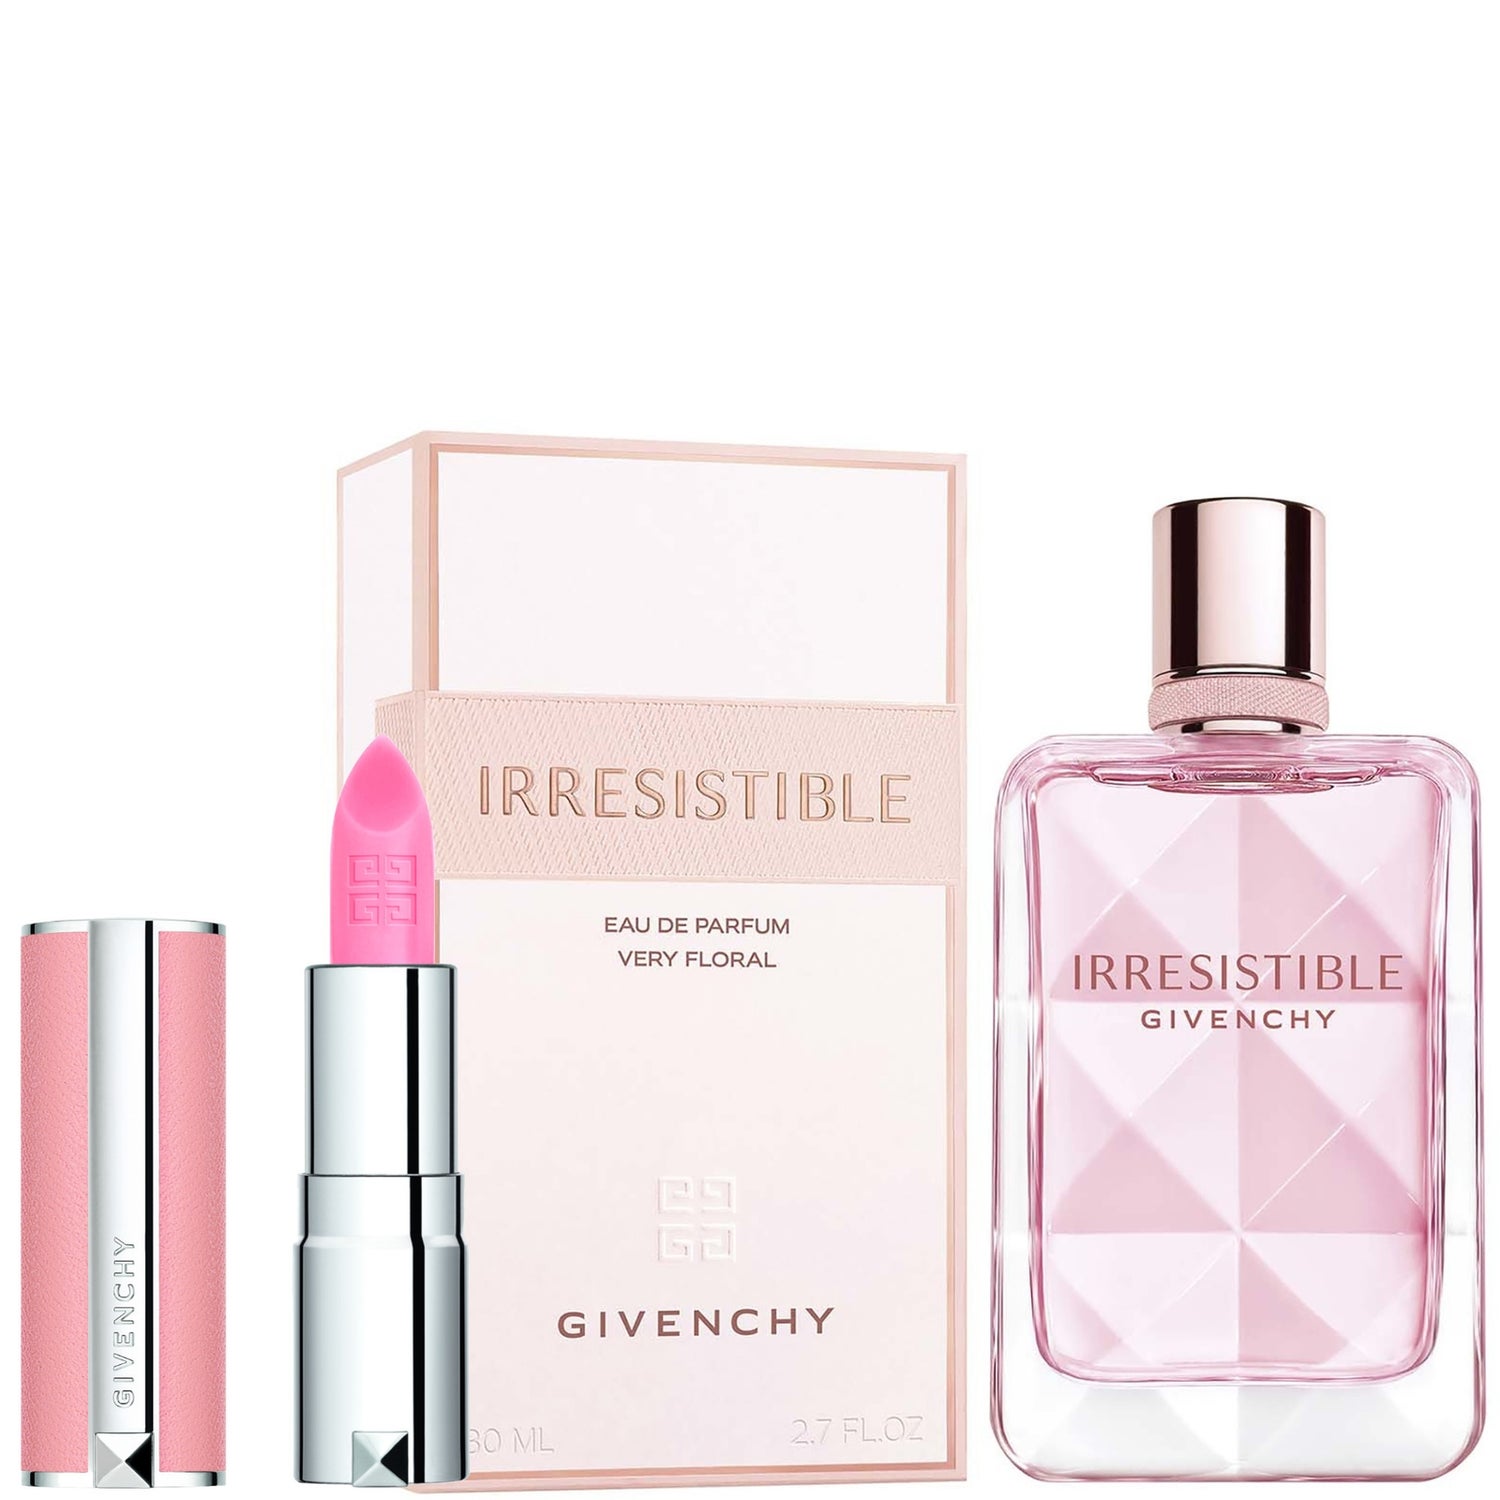 Givenchy Exclusive Irresistible Very Floral Eau de Parfum and Rose Perfecto Lipstick Duo